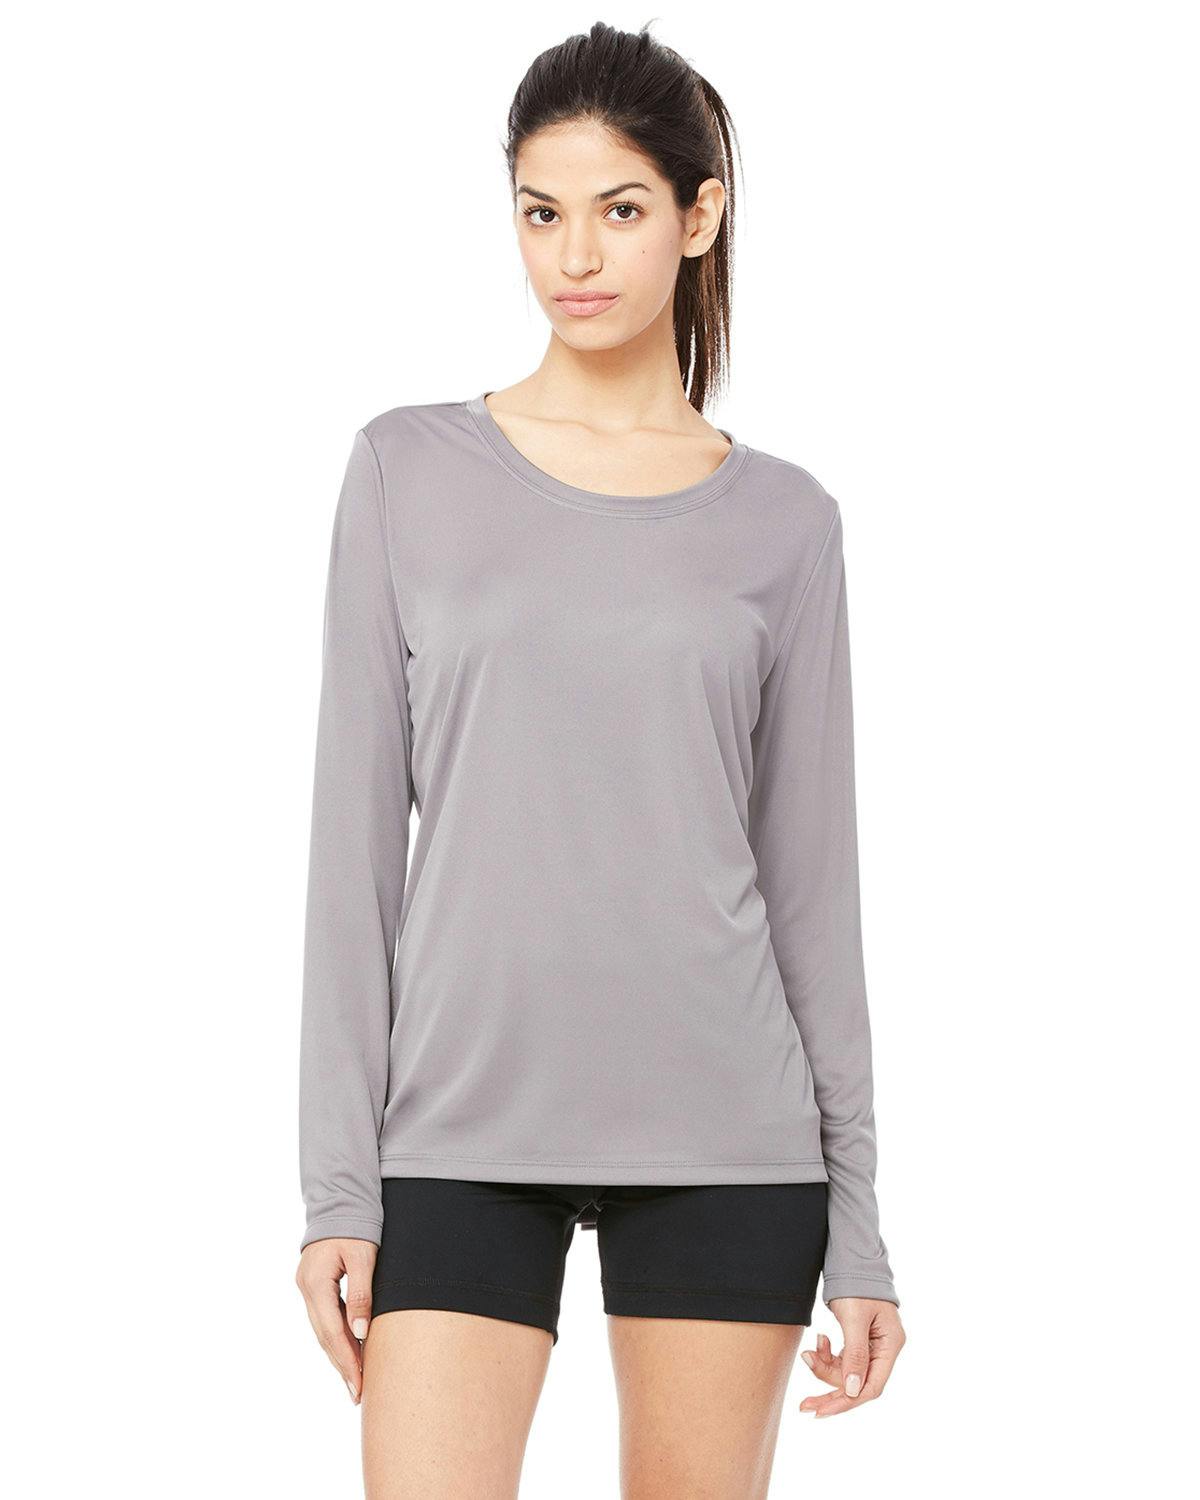 Image for Ladies' Performance Long-Sleeve T-Shirt